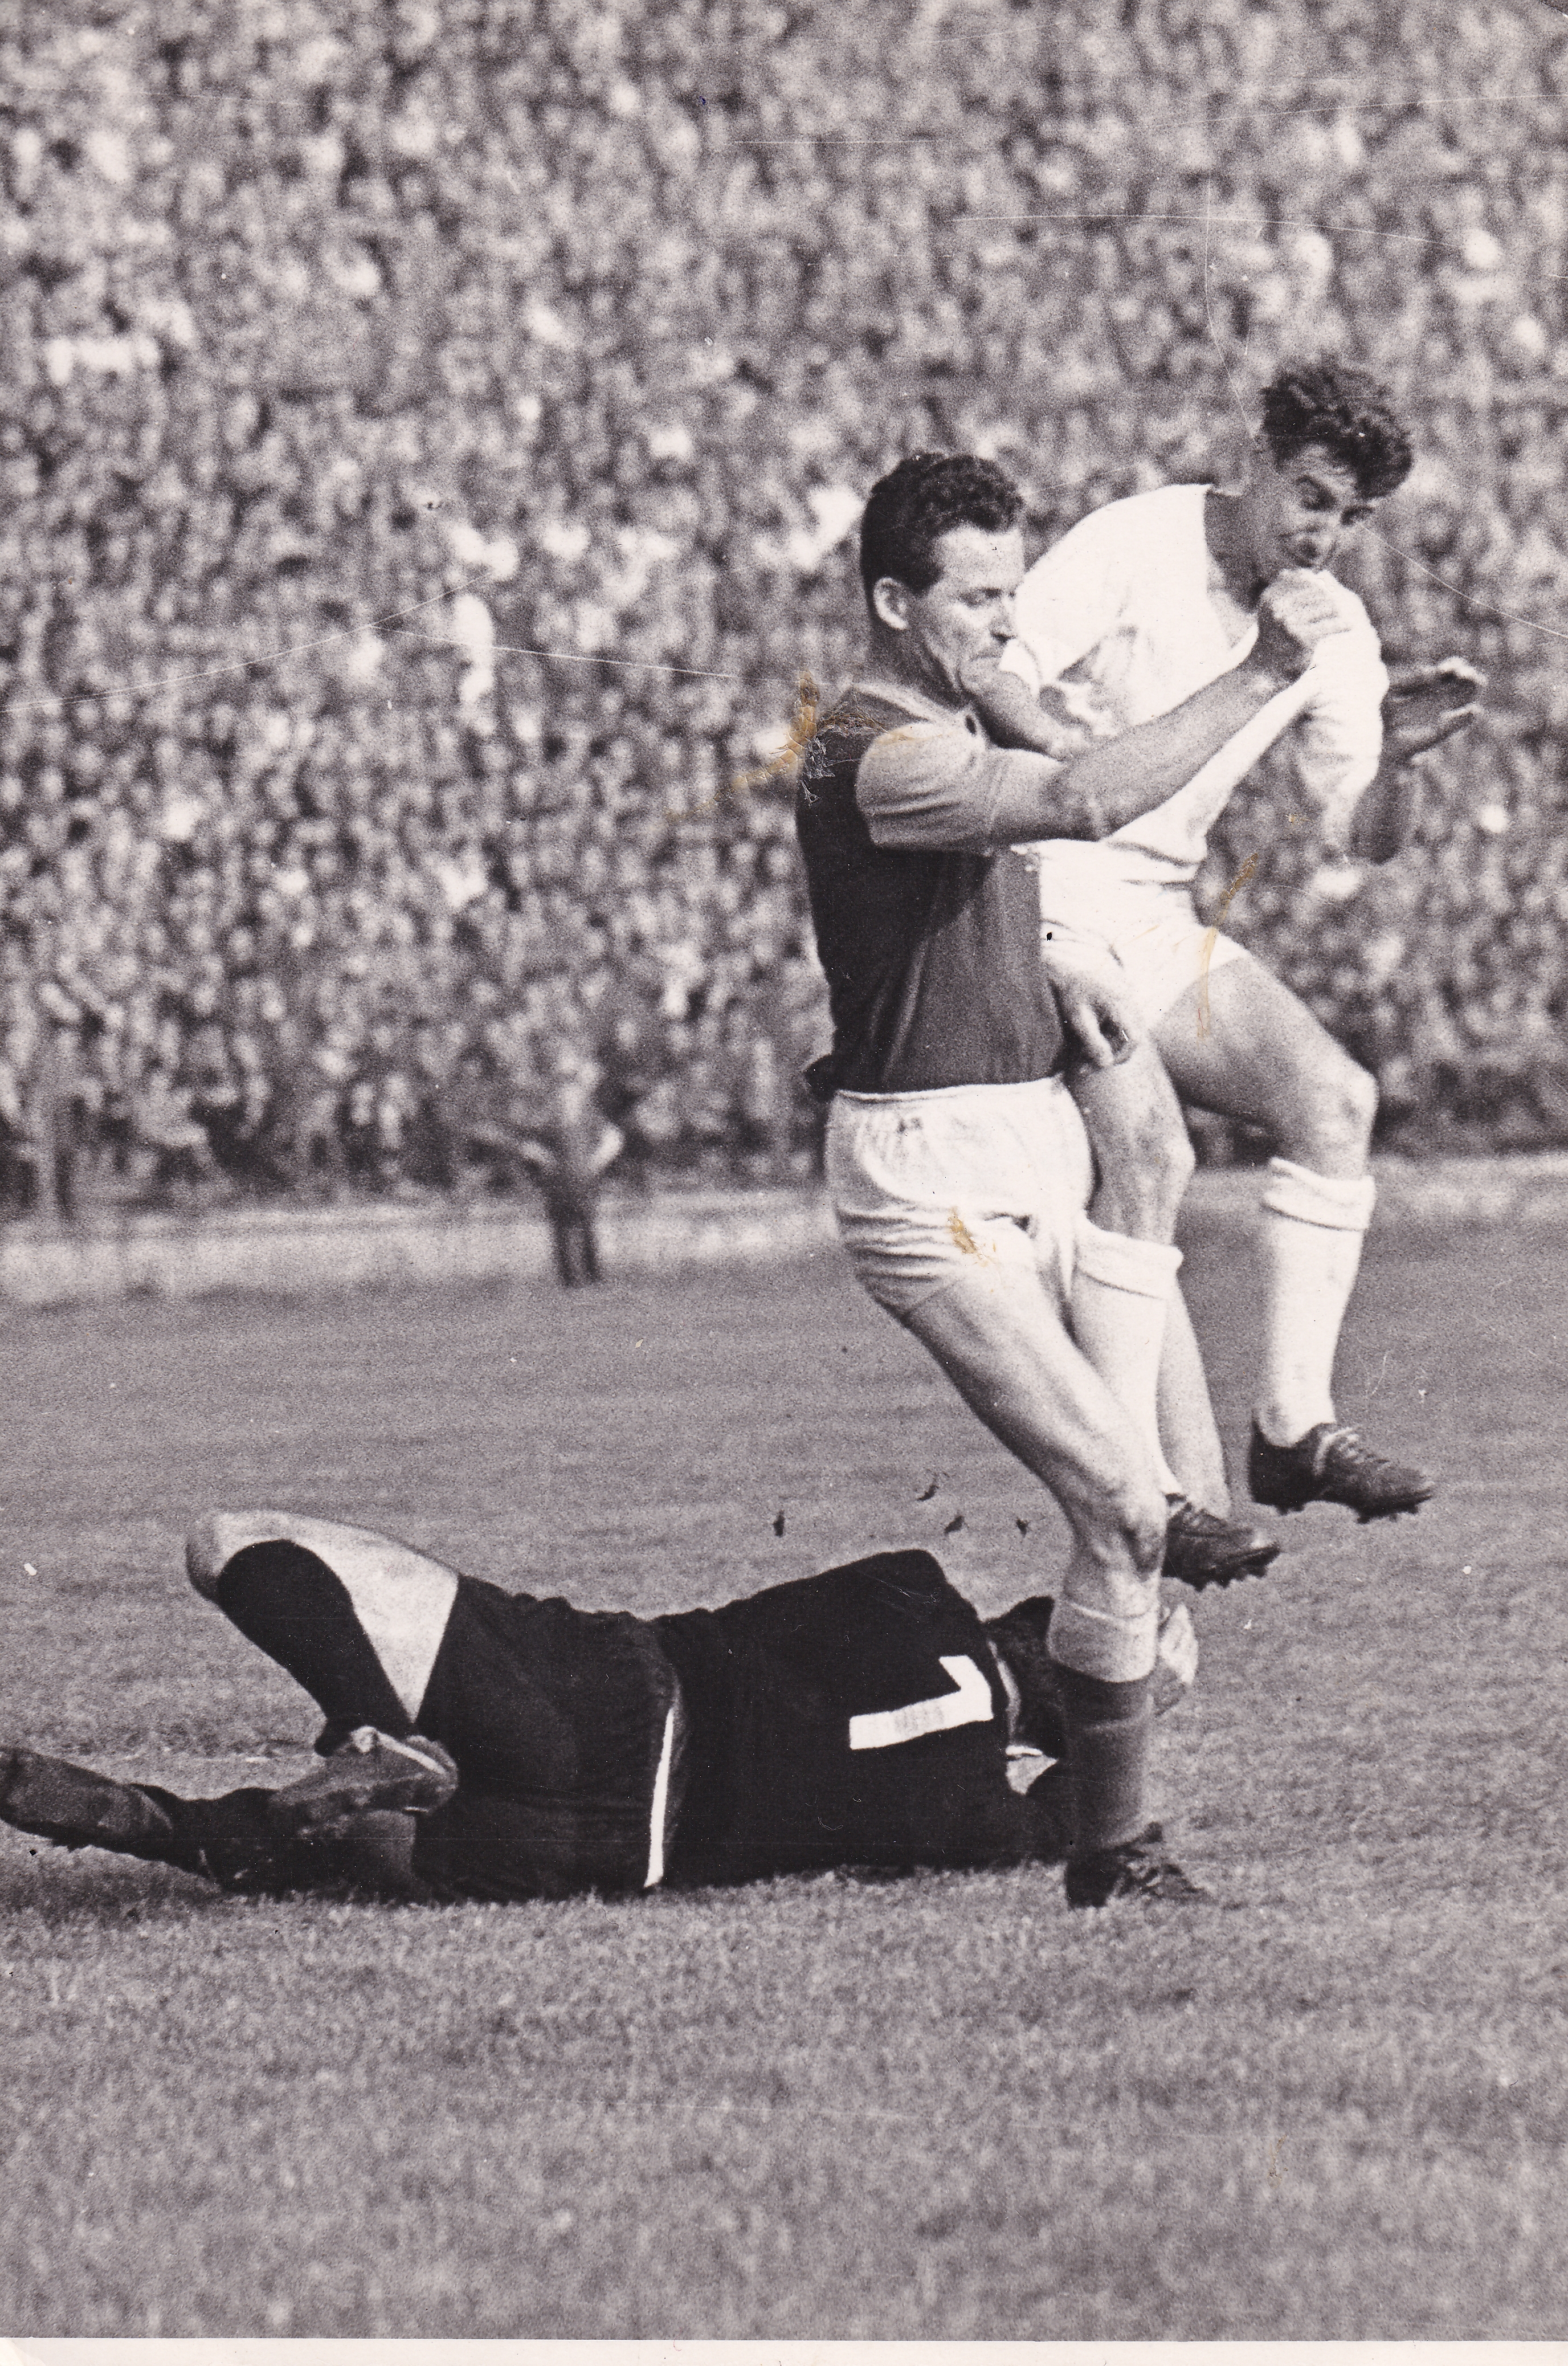 František Valošek (jumping on the right) in the first half of the 1960s at Ostrava's Bazaly stadium in a match against Dukla Prague